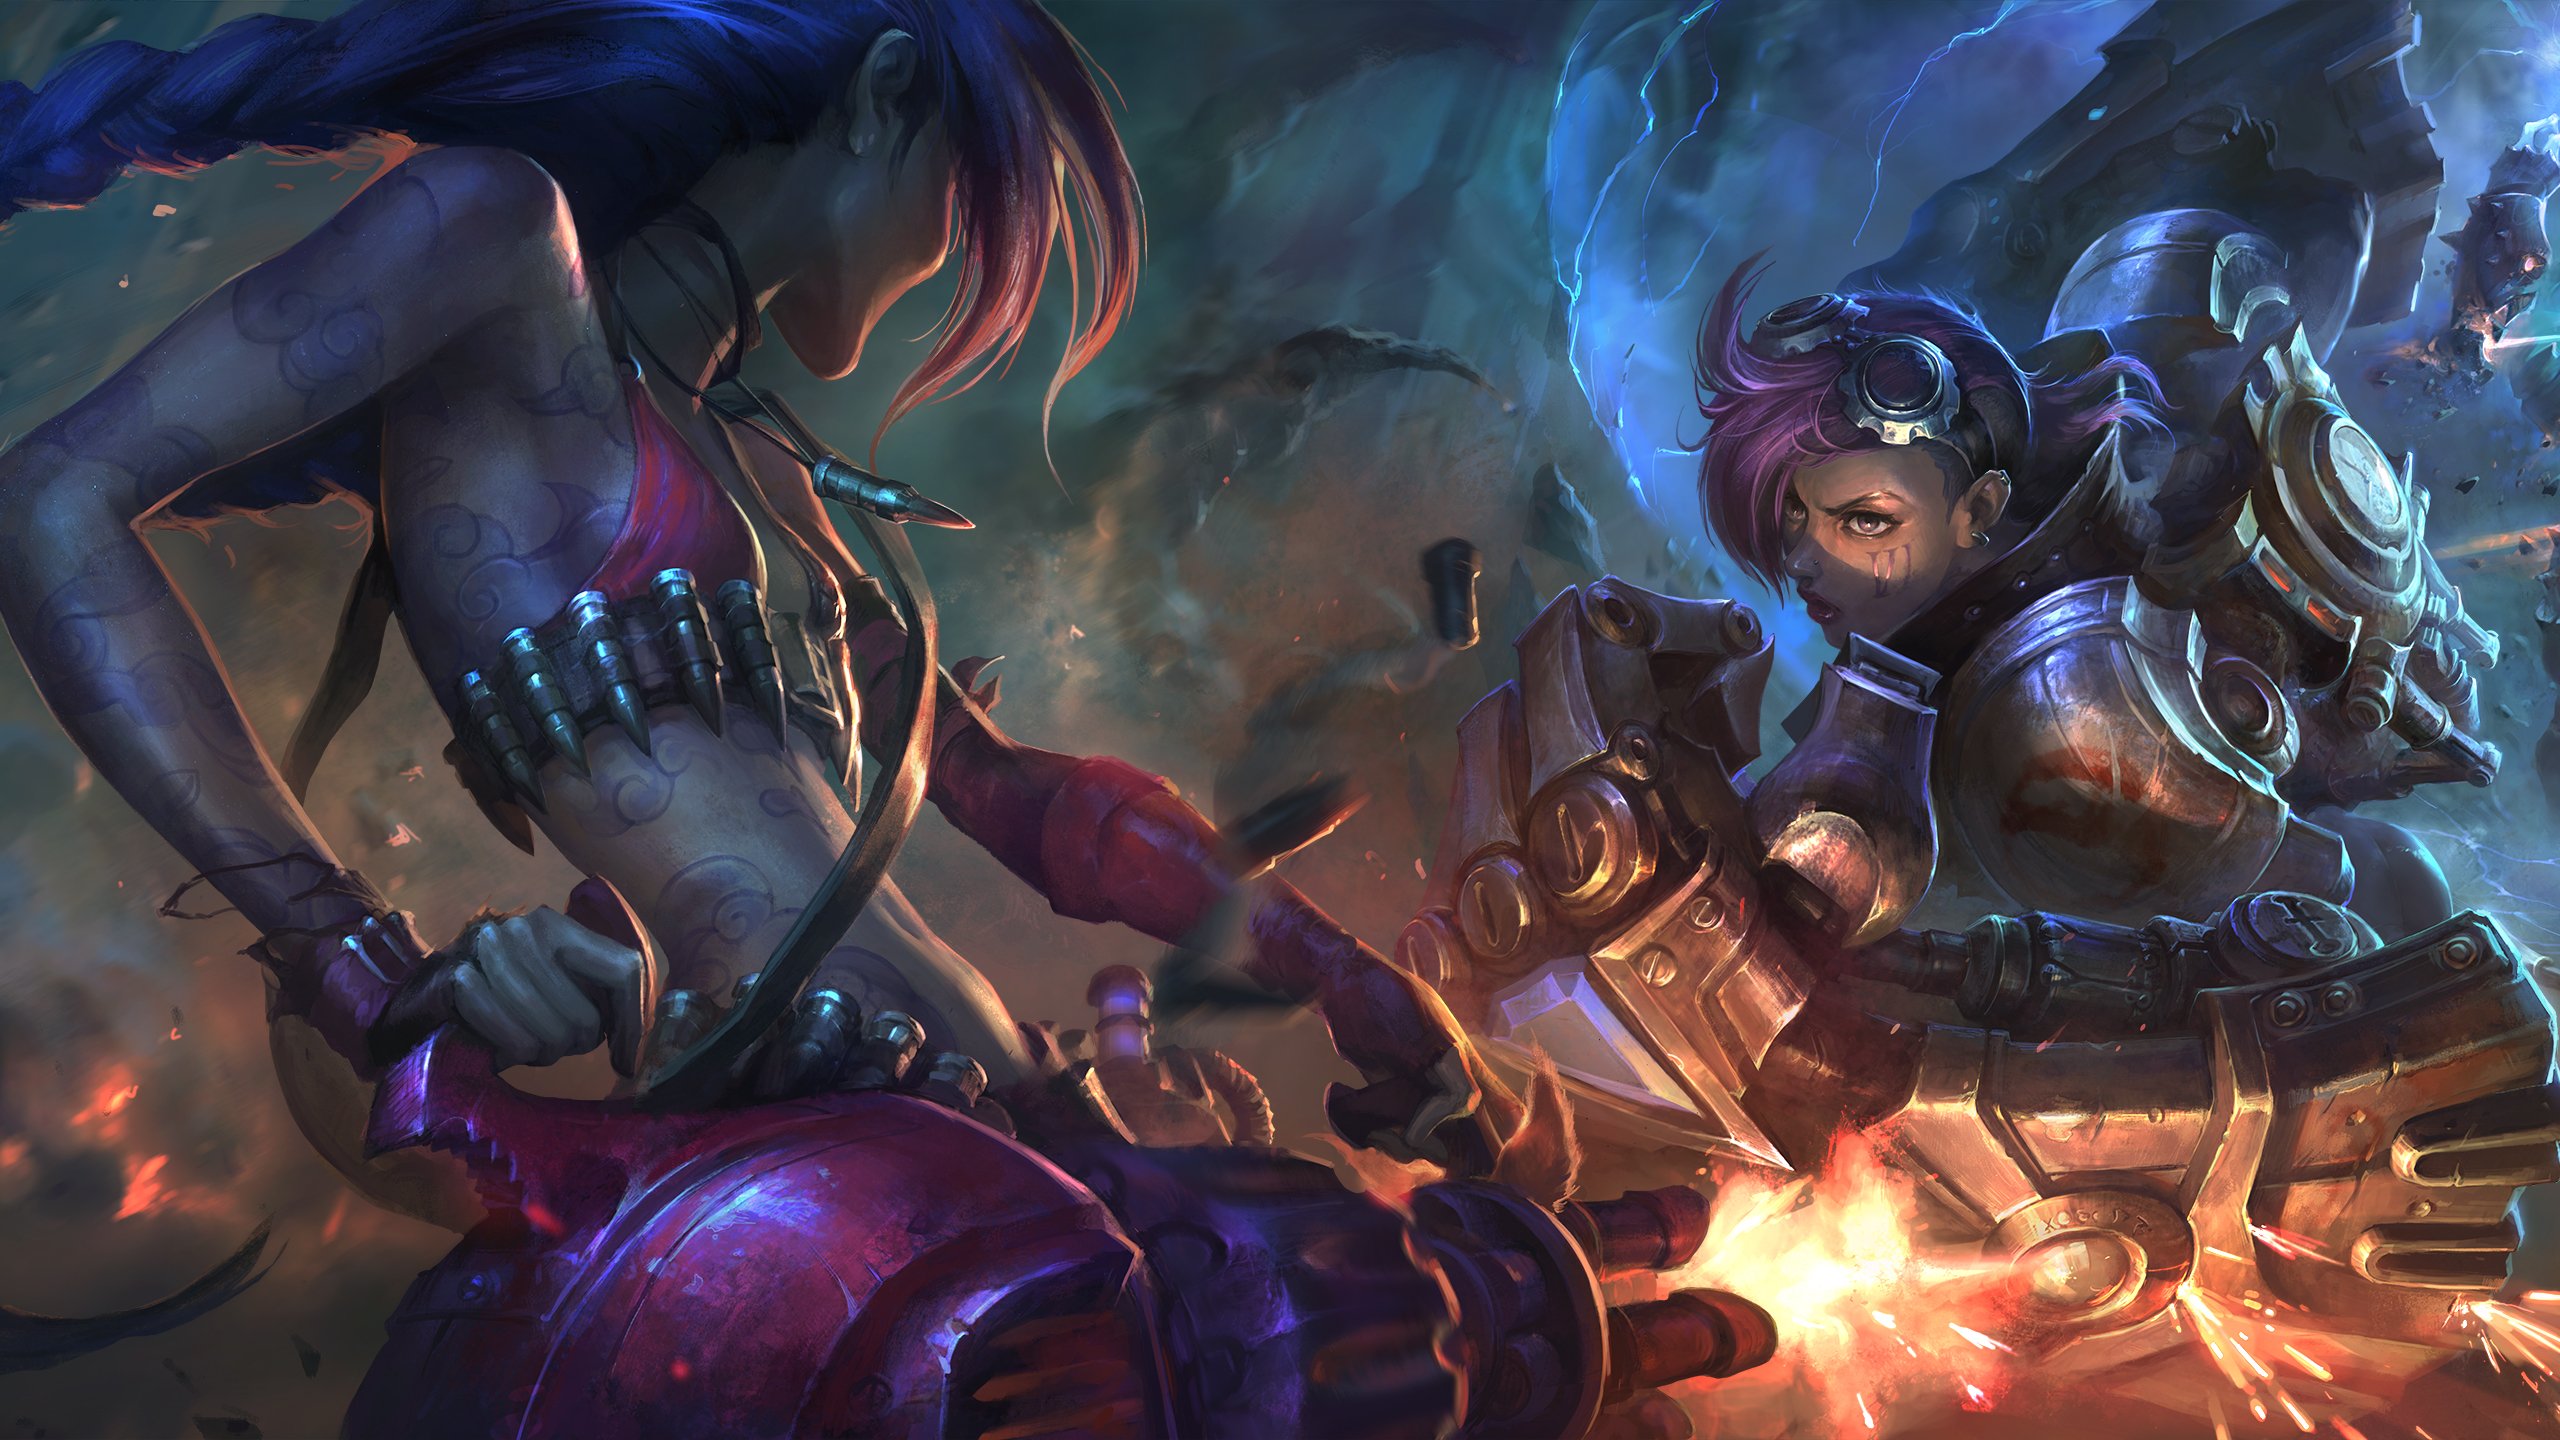 Riot Games Revealed Dragon-Themed Skins For Popular Champions Such As Lee Sin, Sett, And Ashe